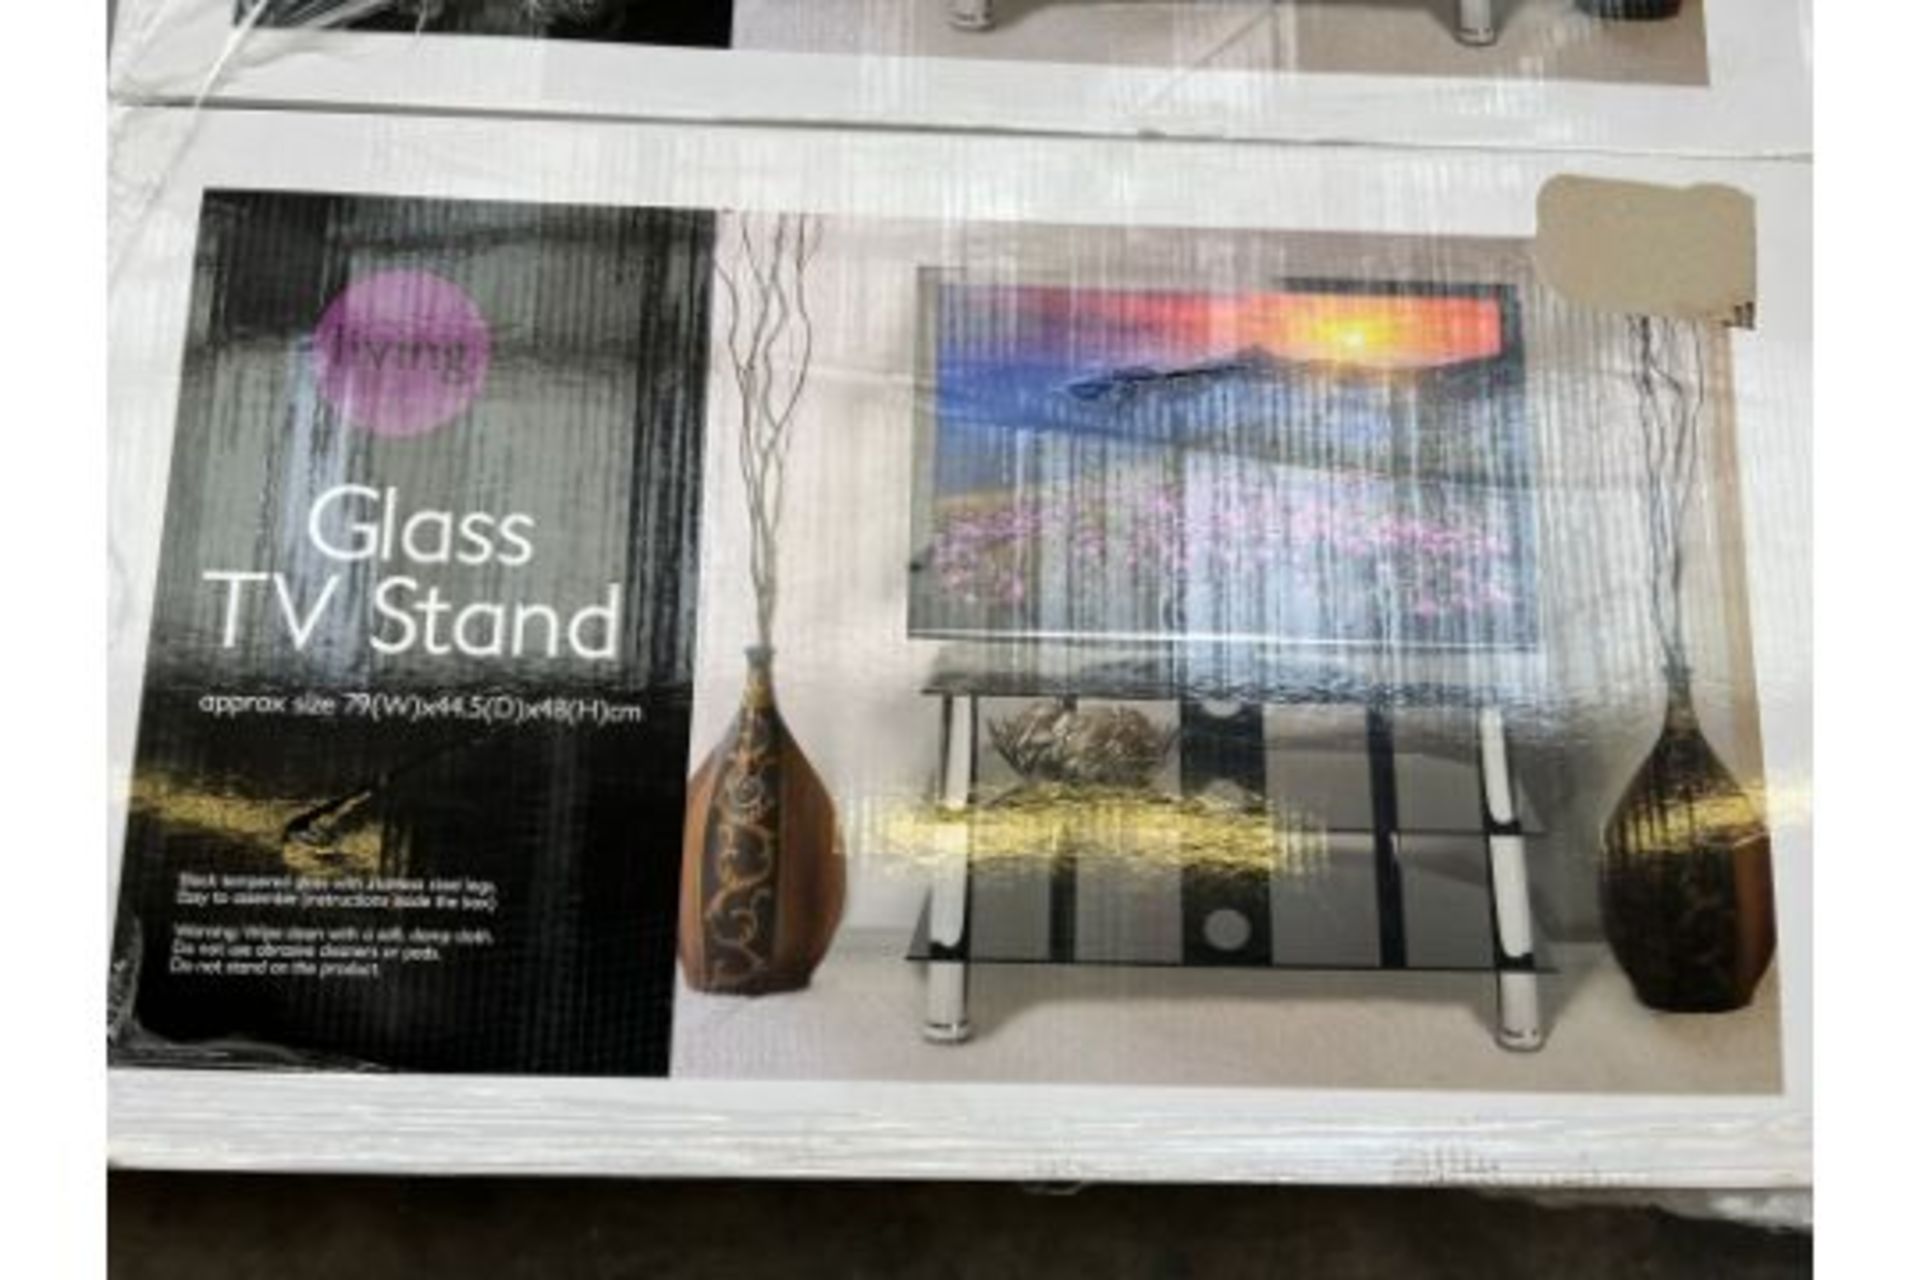 TRADE LOT 10 x NEW LIVING GLASS TV STANDS. BLACK TEMPERED GLASS WITH STAINLESS STEEL LEGS. EASY TO